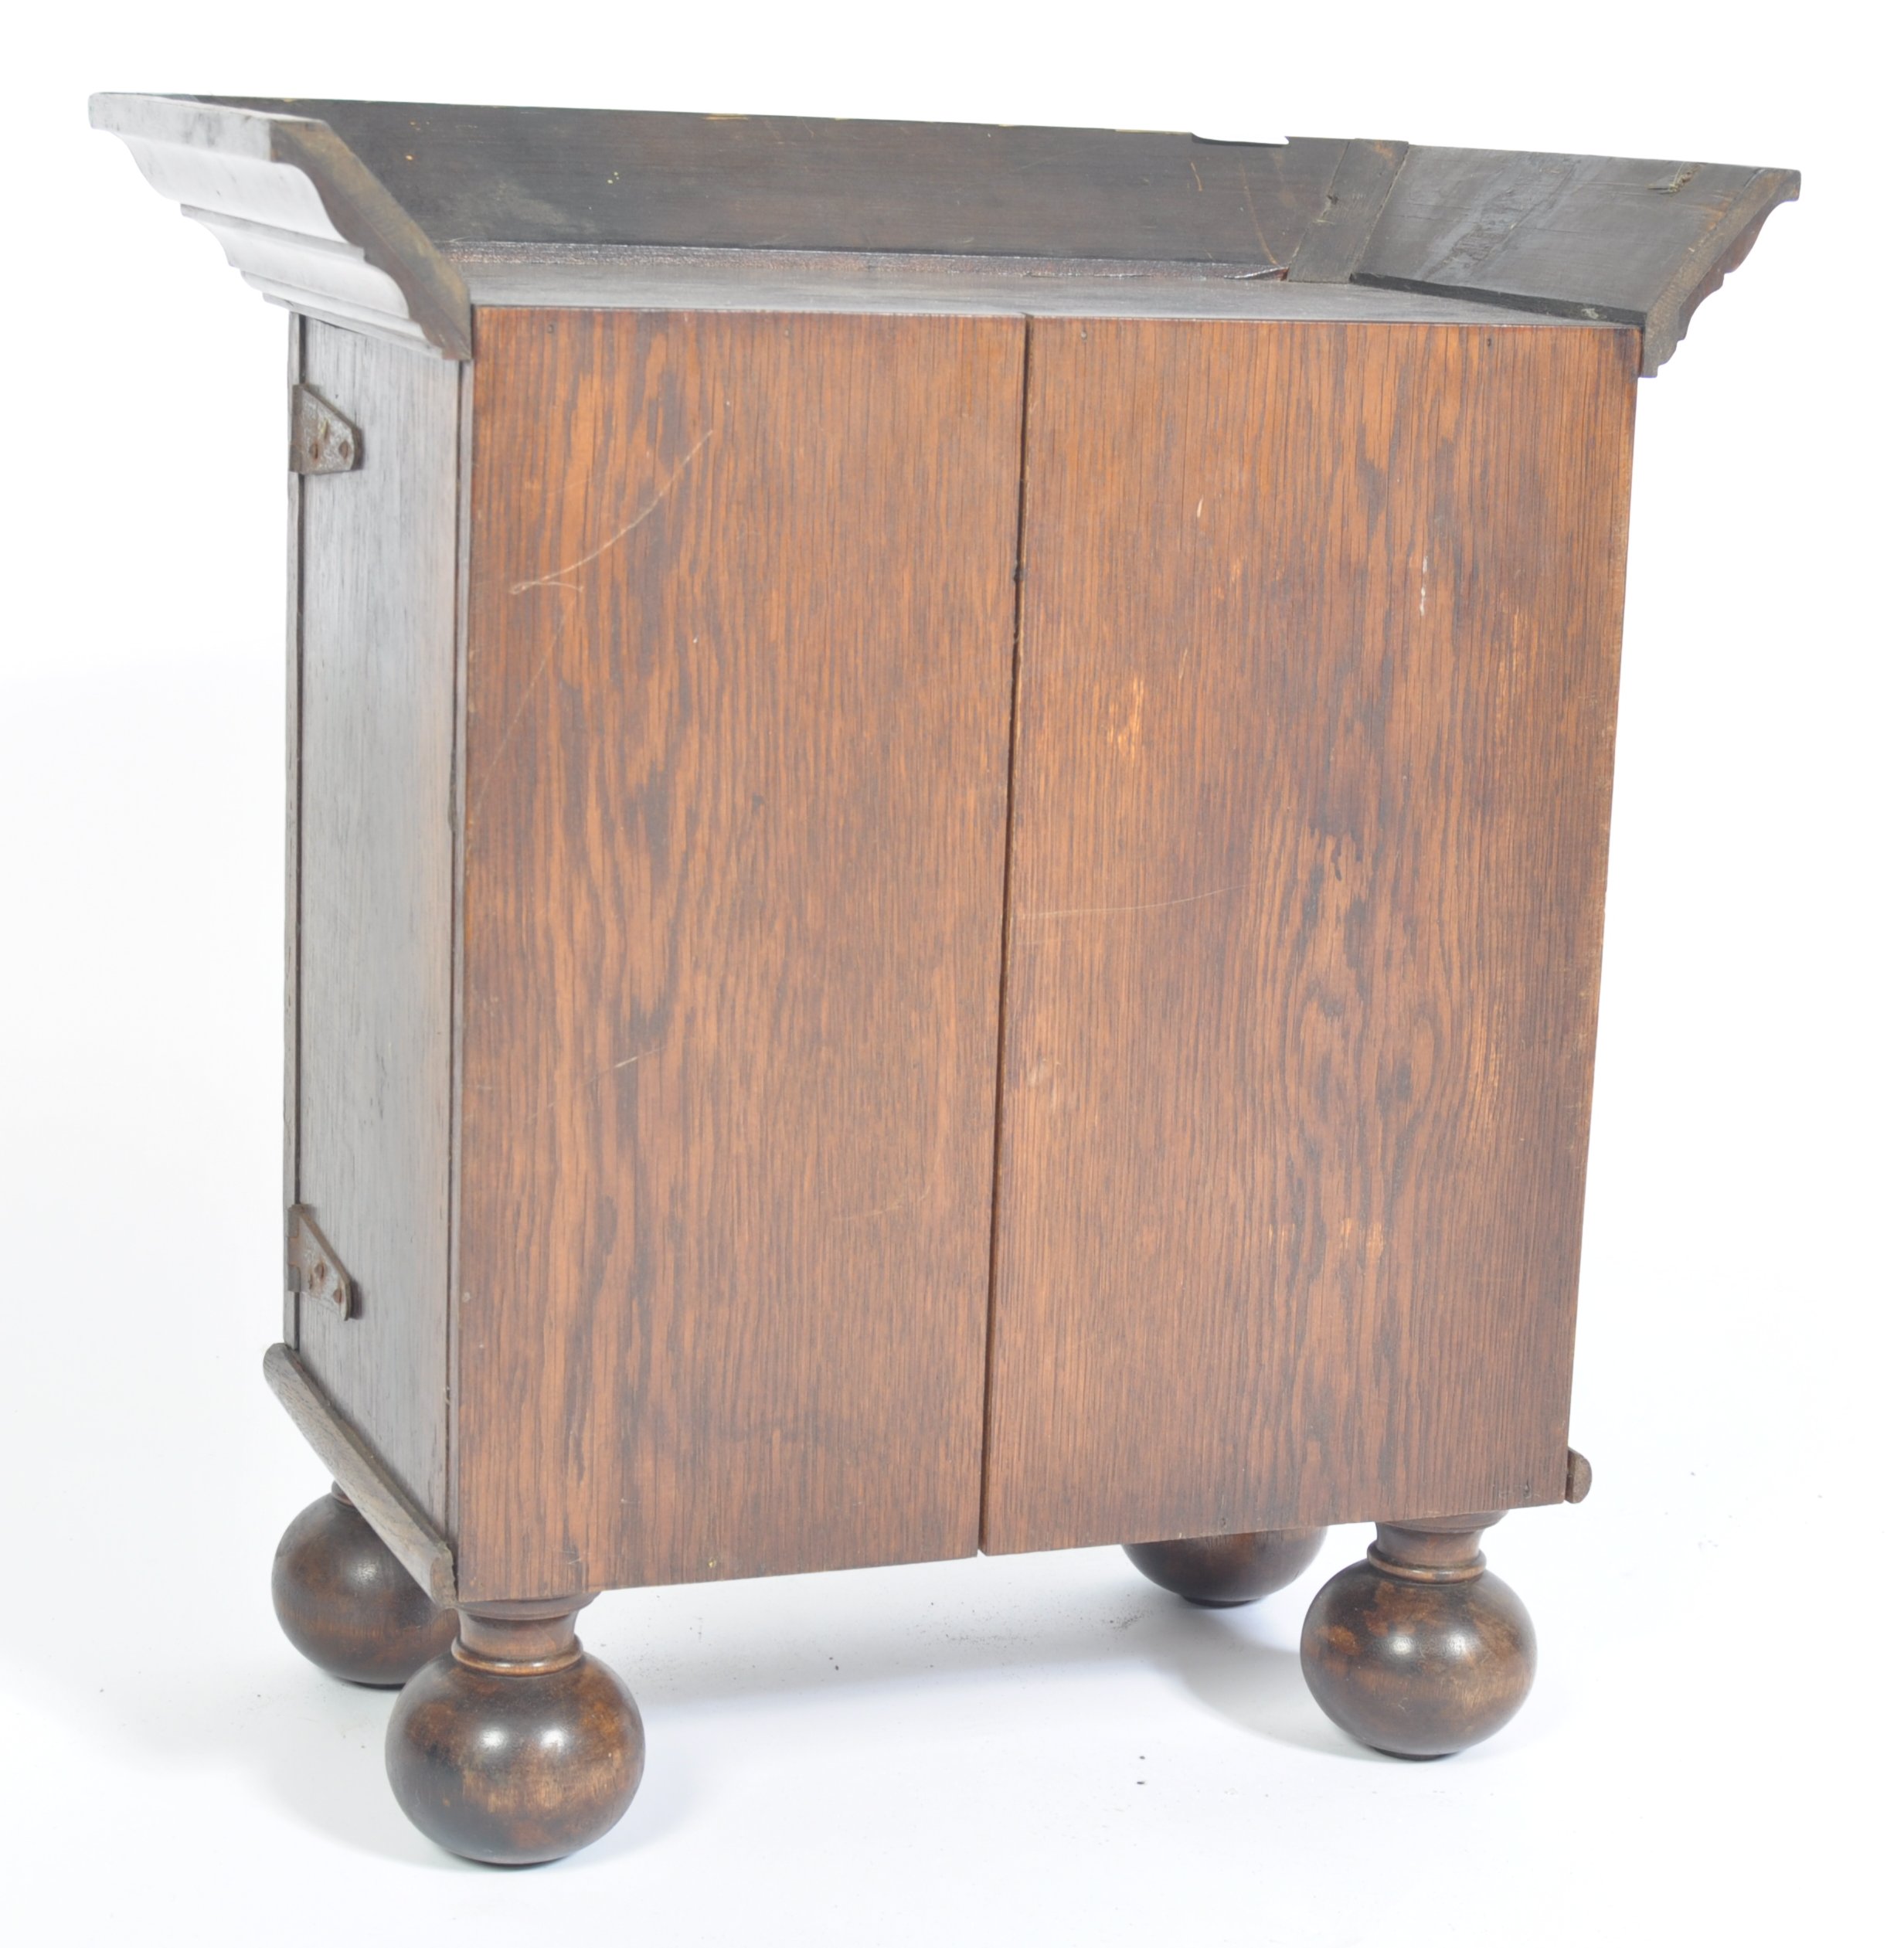 17TH / 18TH CENTURY OAK SPICE OR APOTHECARY CABINET - Image 9 of 9